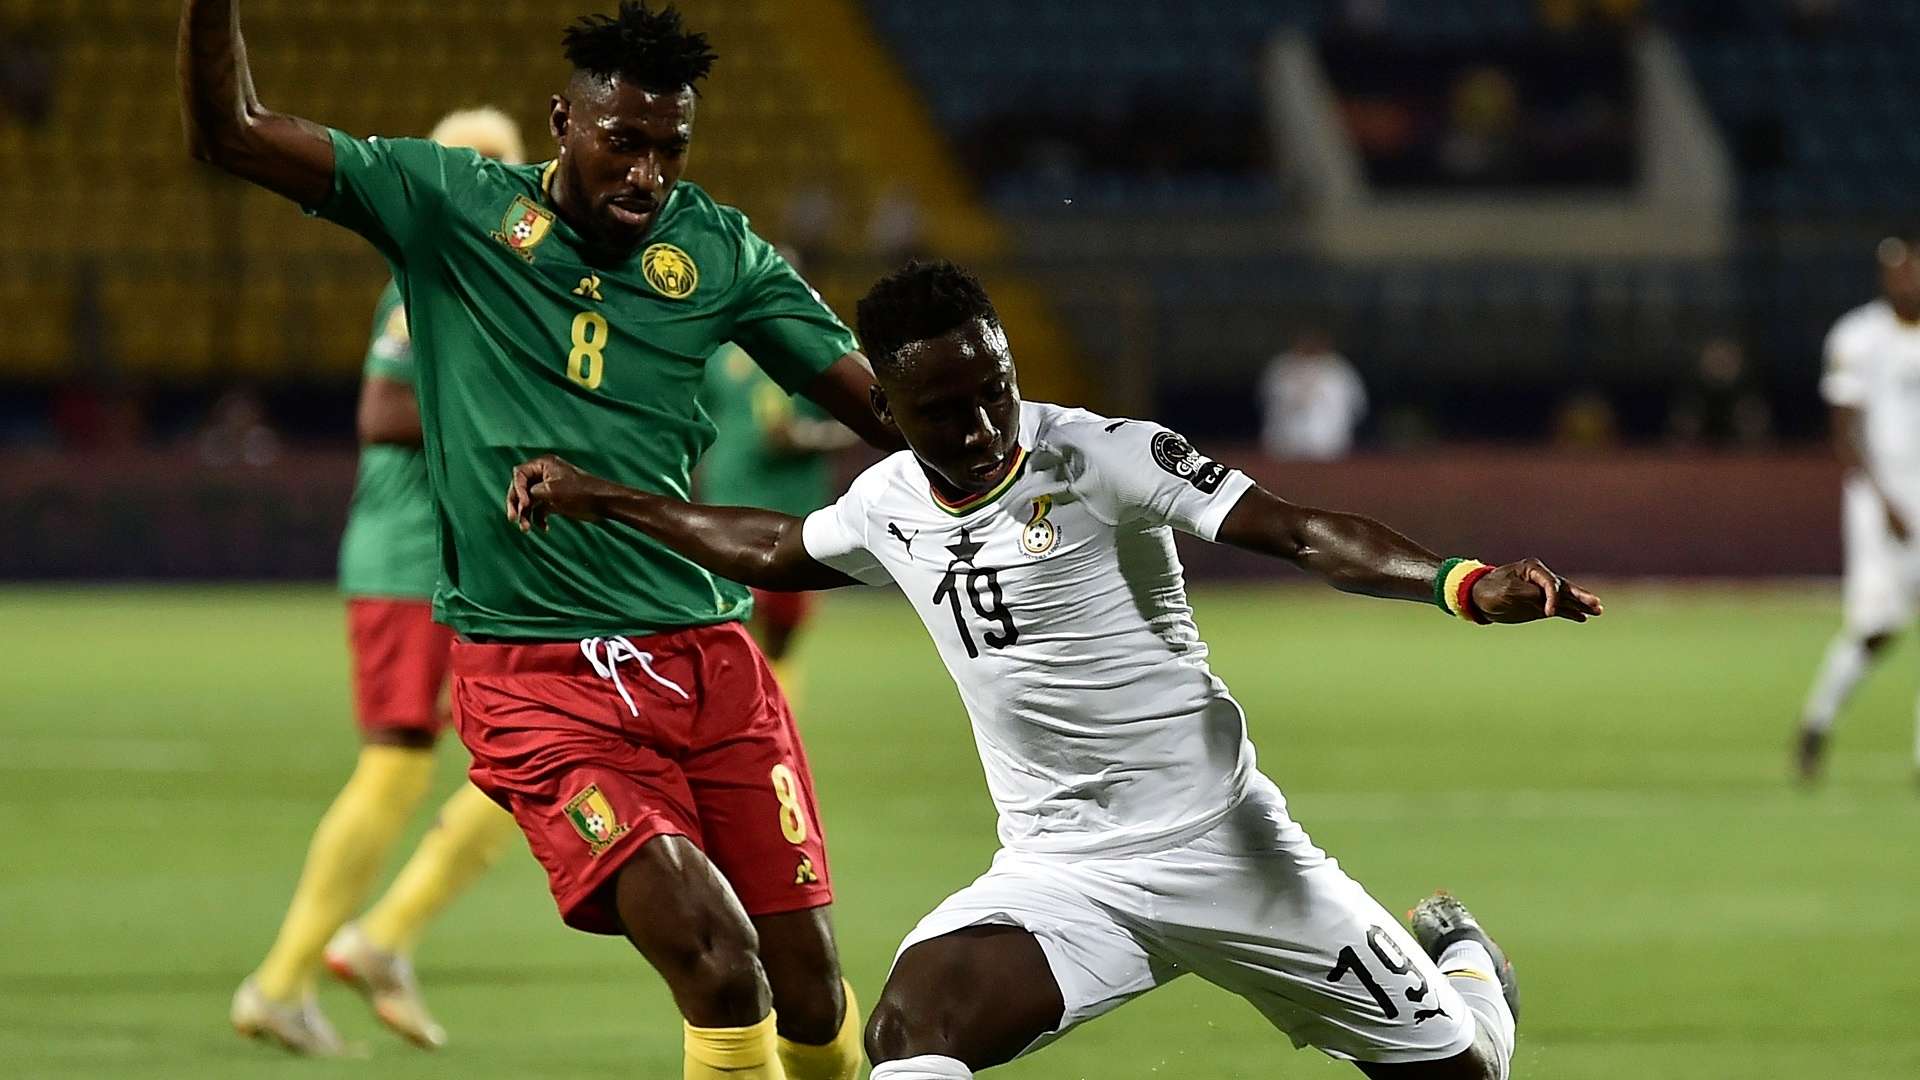 Ghana's midfielder Samuel Owusu prepares to take a shot as he is marked by Cameroon's midfielder Andre-Frank Zambo Anguissa during the 2019 Africa Cup of Nations